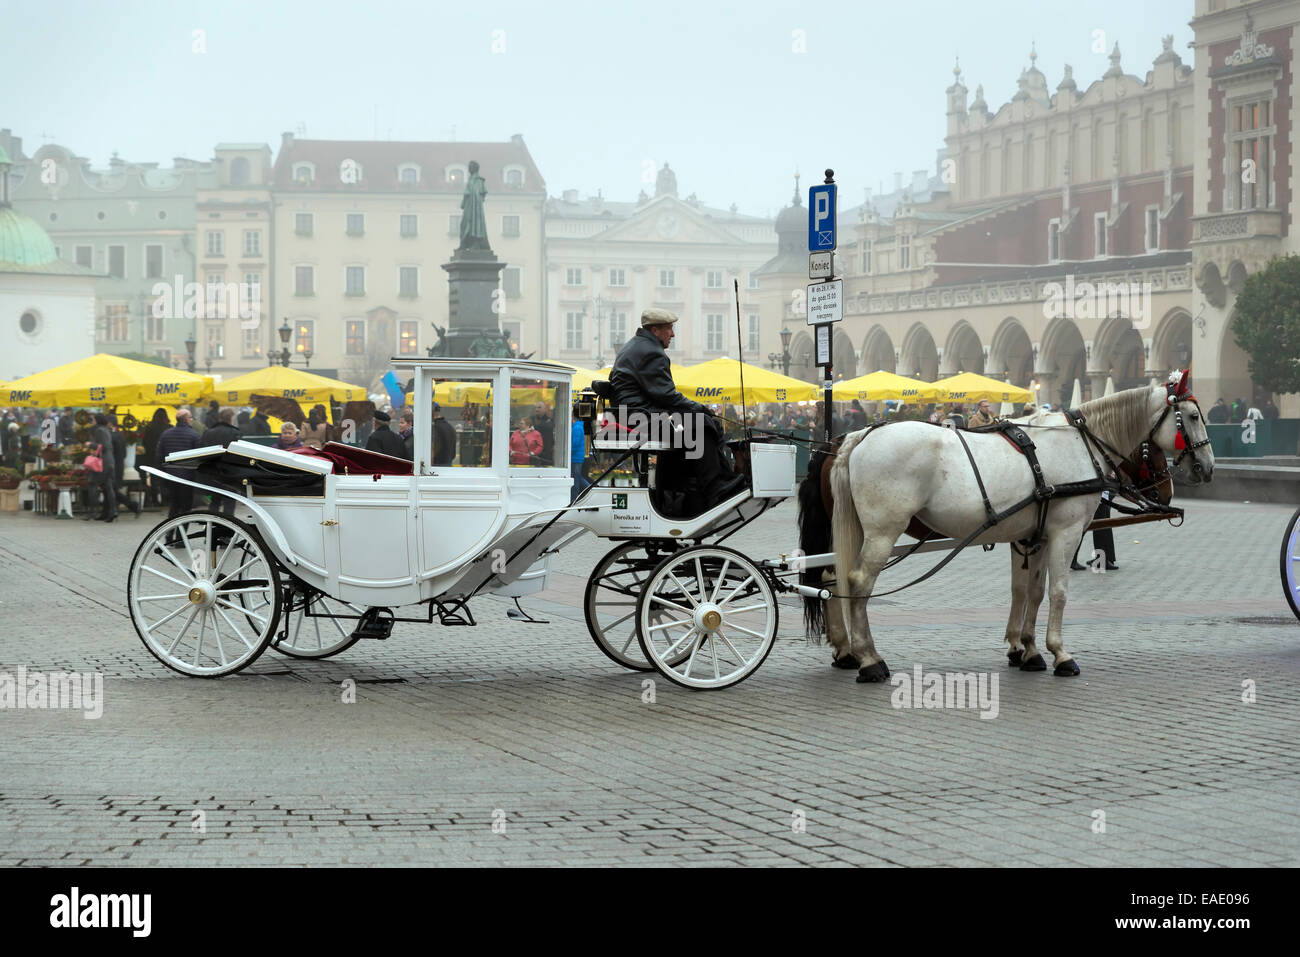 KRAKOW, POLAND - OCTOBER 26, 2014: Horse carriage on Krakow's Main Market Square. In the background is a historic town hall call Stock Photo